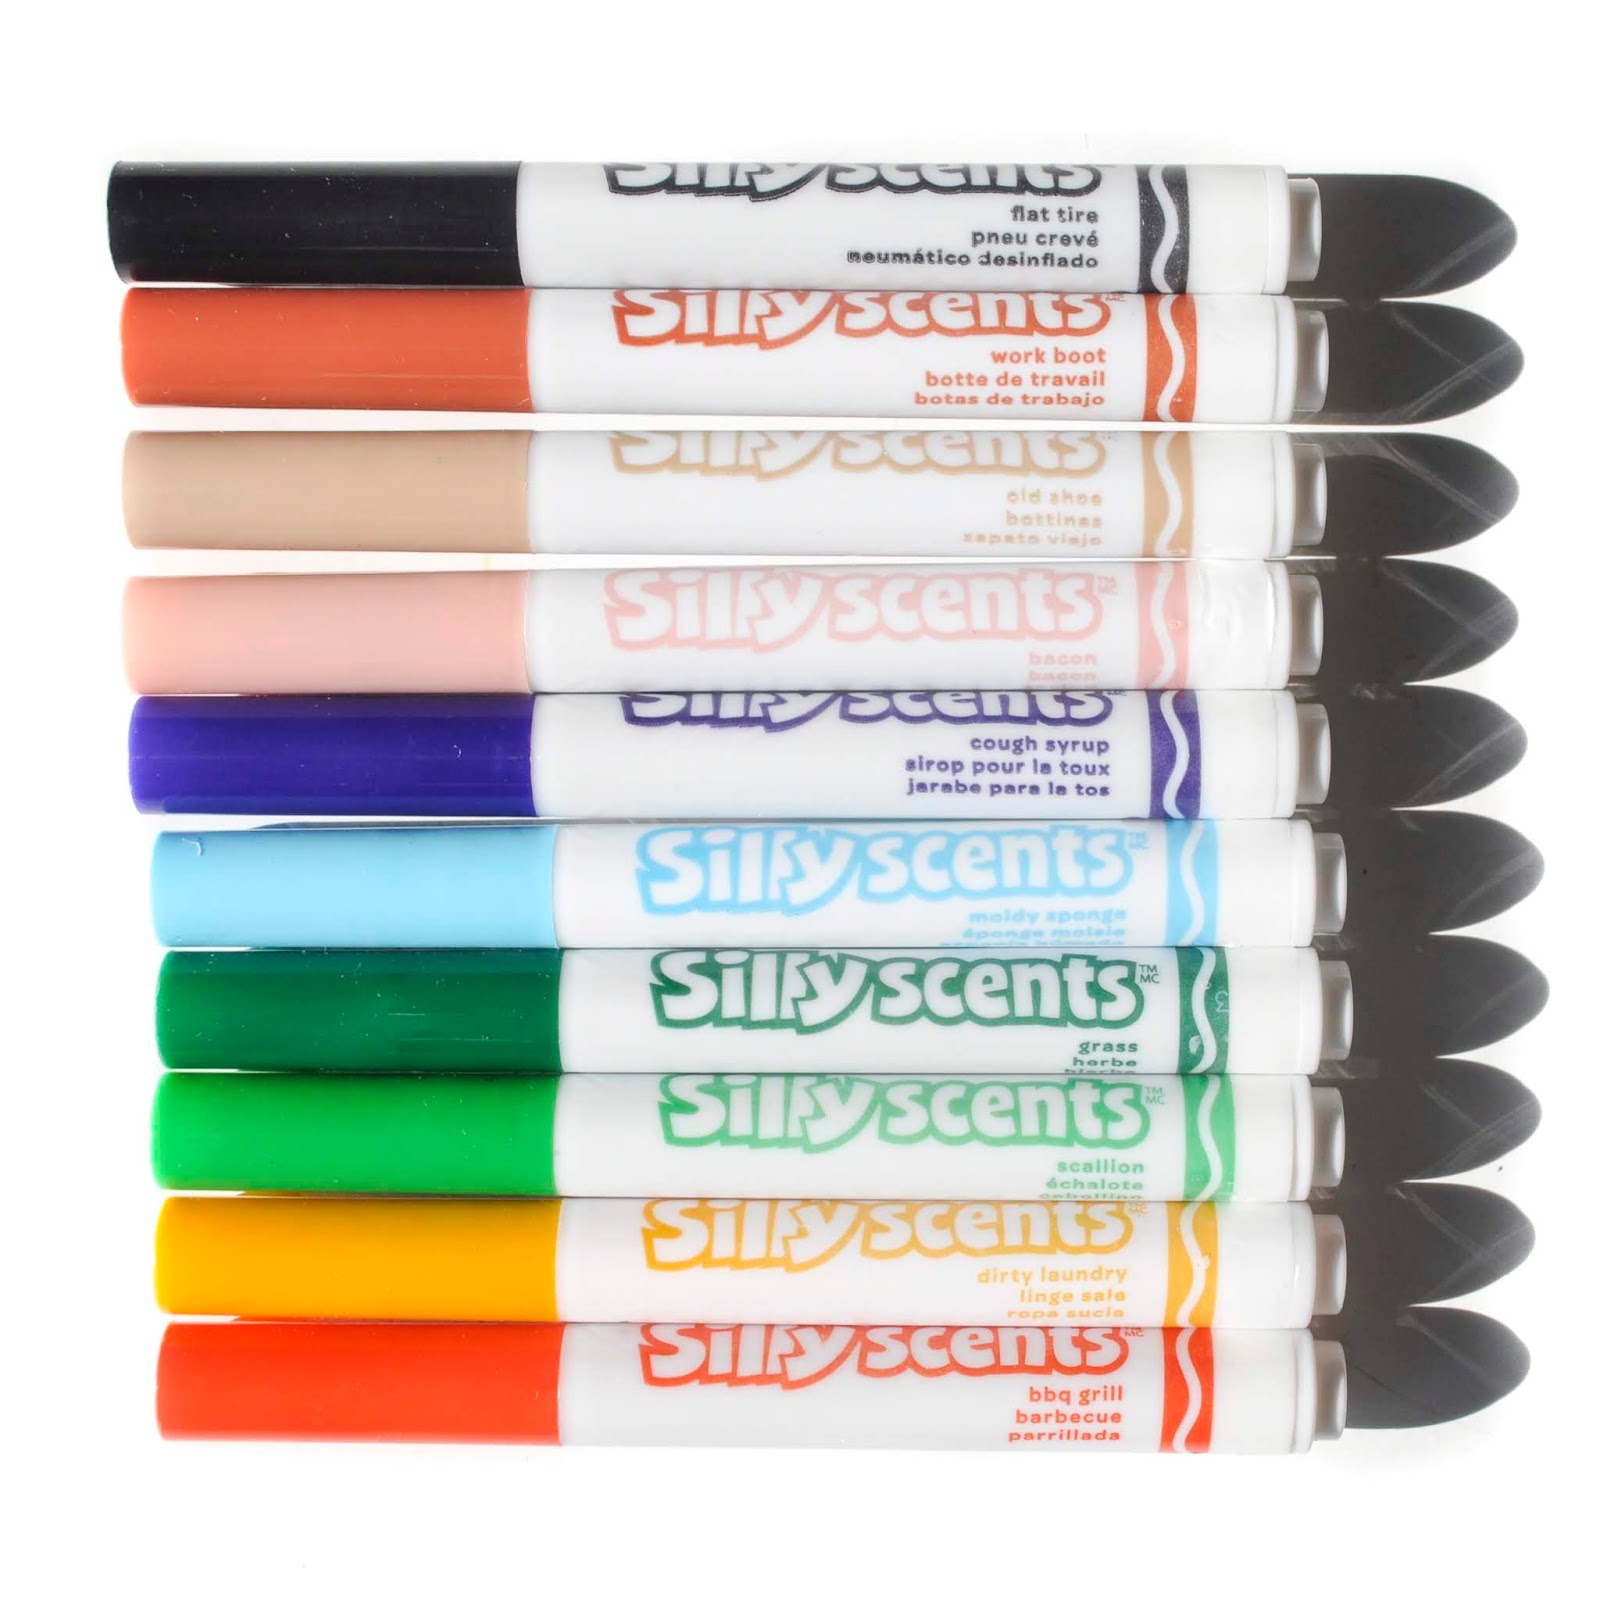 Crayola Silly Scents Sweet & Stinky Washable Markers